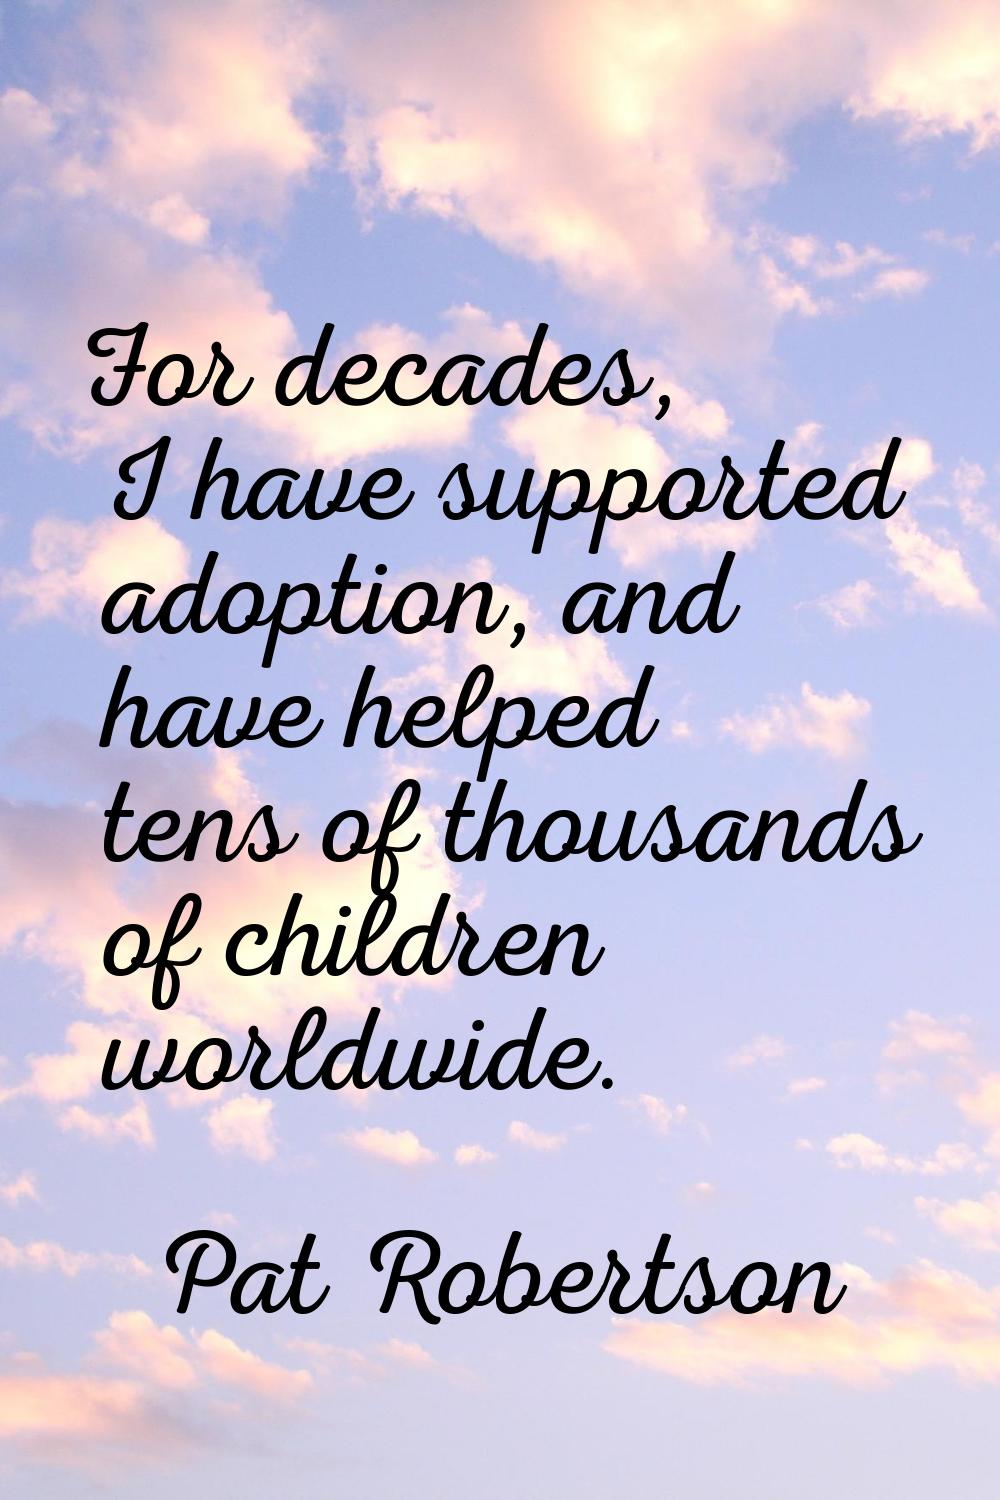 For decades, I have supported adoption, and have helped tens of thousands of children worldwide.